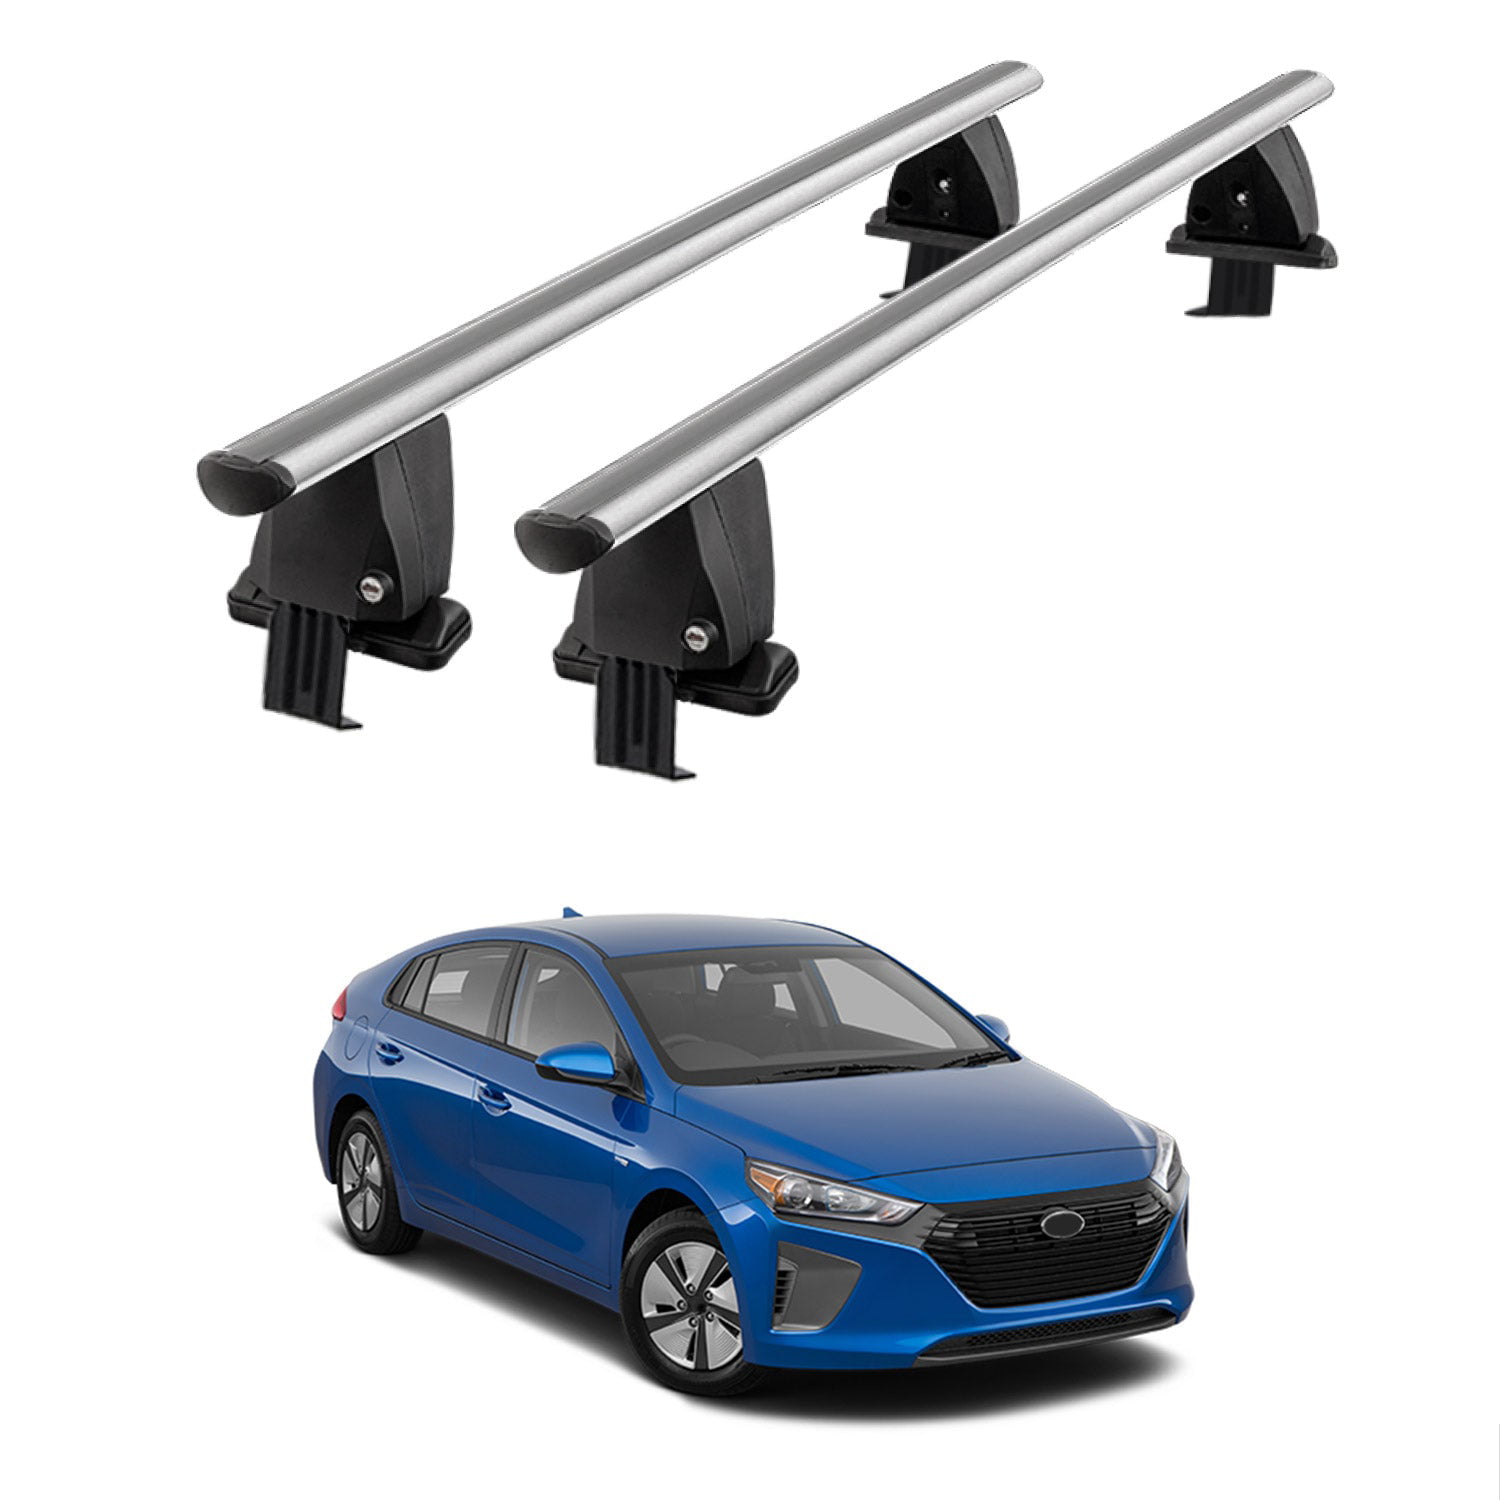 OMAC USA Specific Smooth Top Roof Rack for Hyundai Ioniq 2017-2022 ...